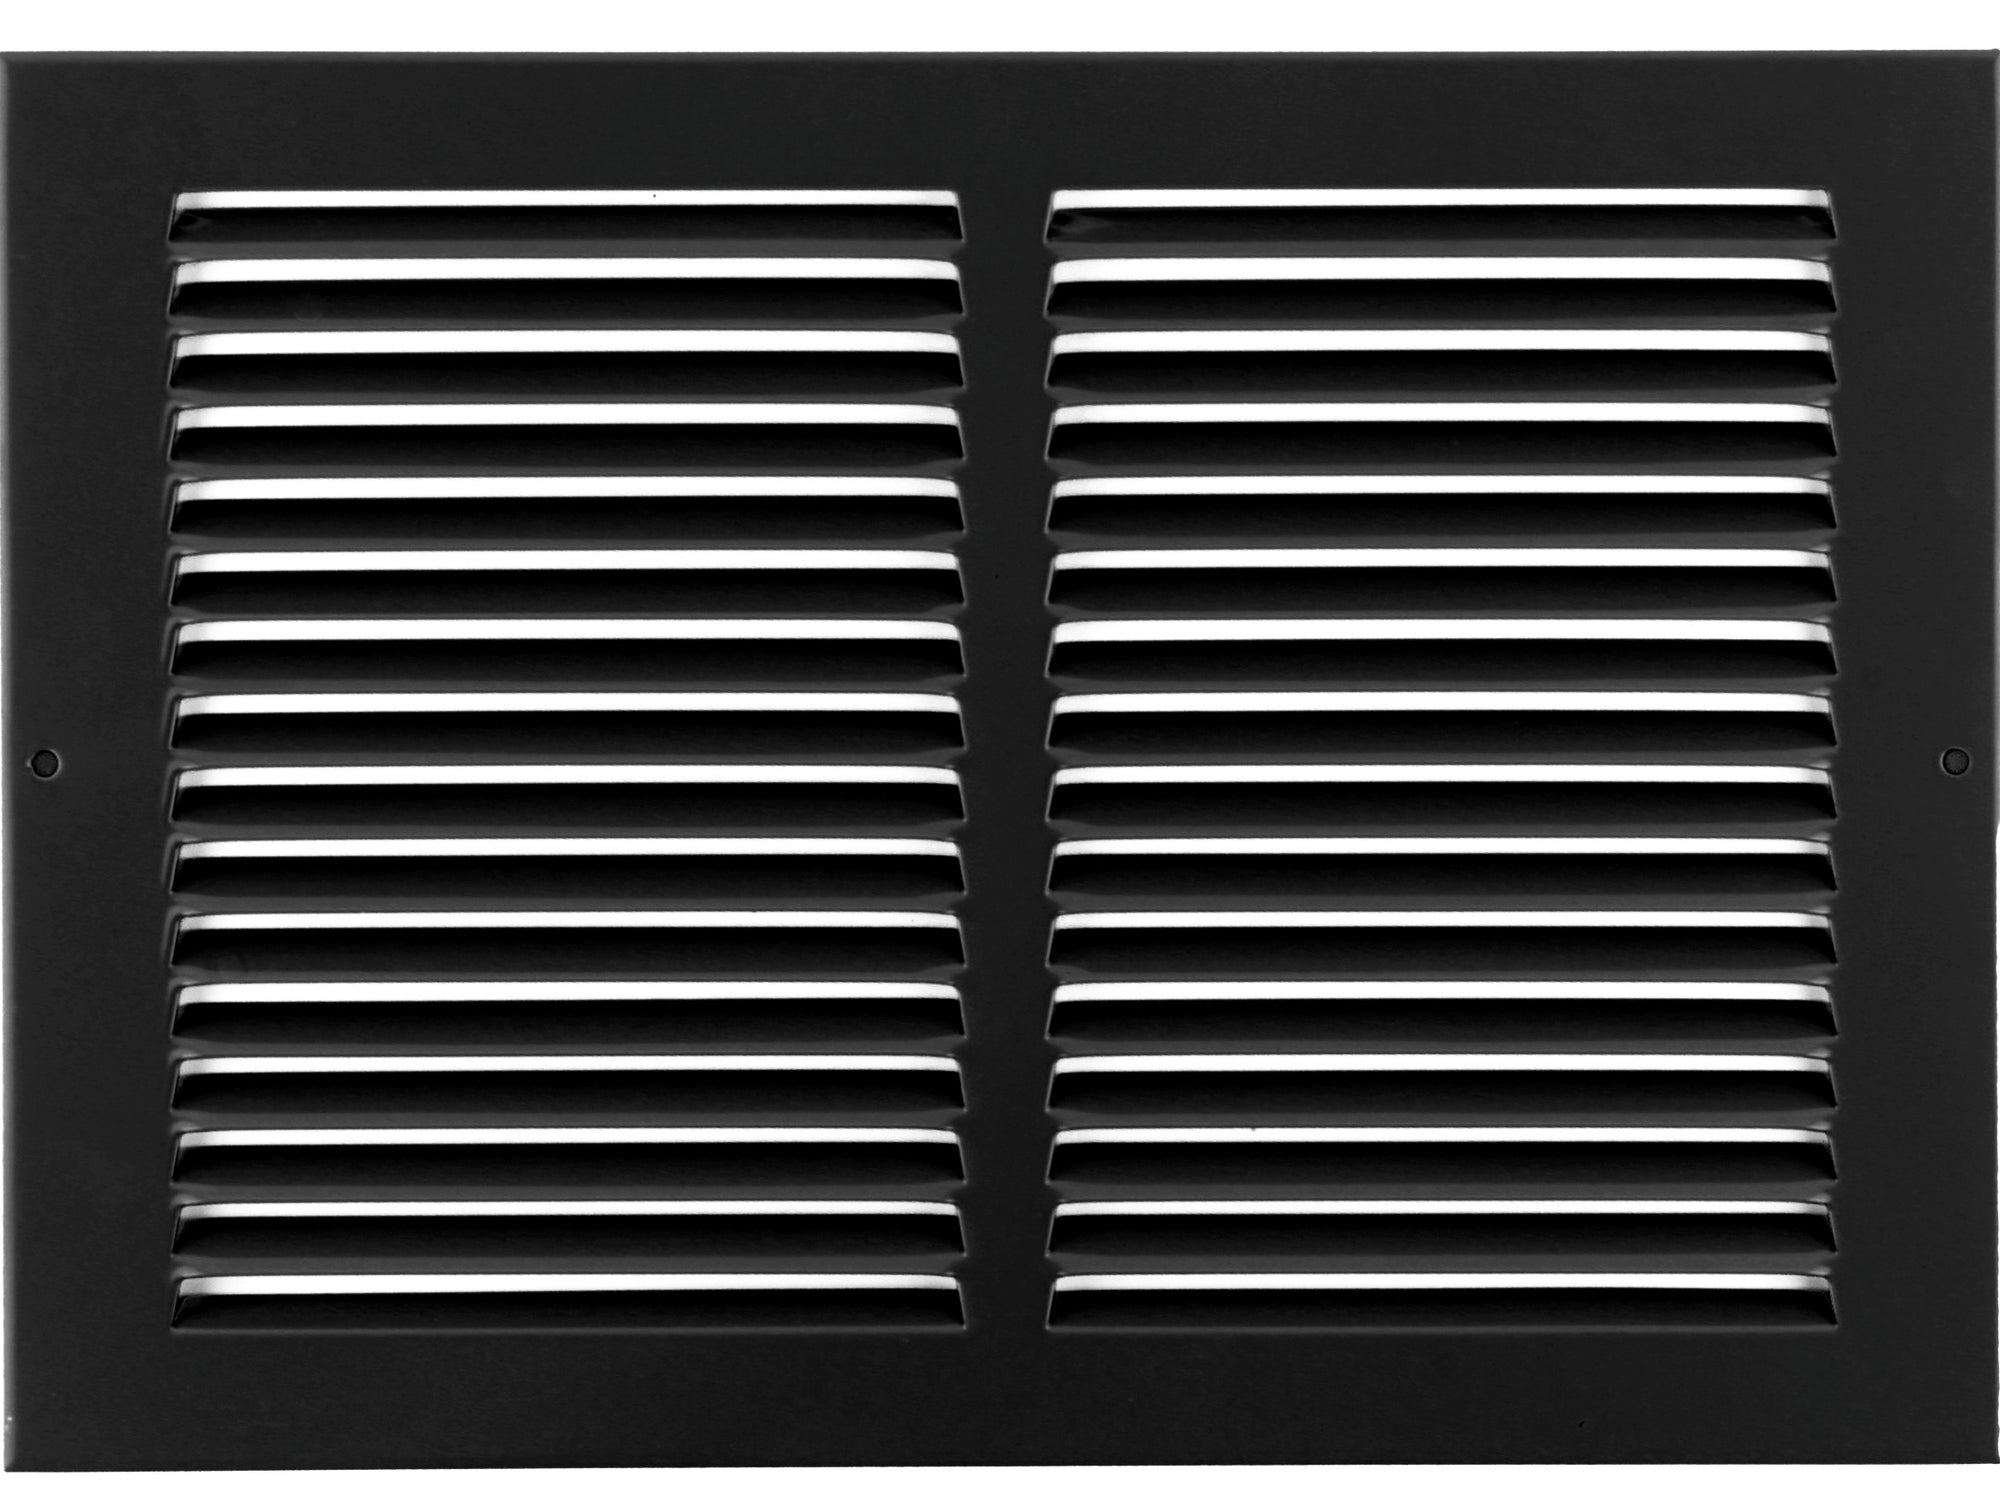 6" X 6" Air Vent Return Grilles - Sidewall and Ceiling - Steel